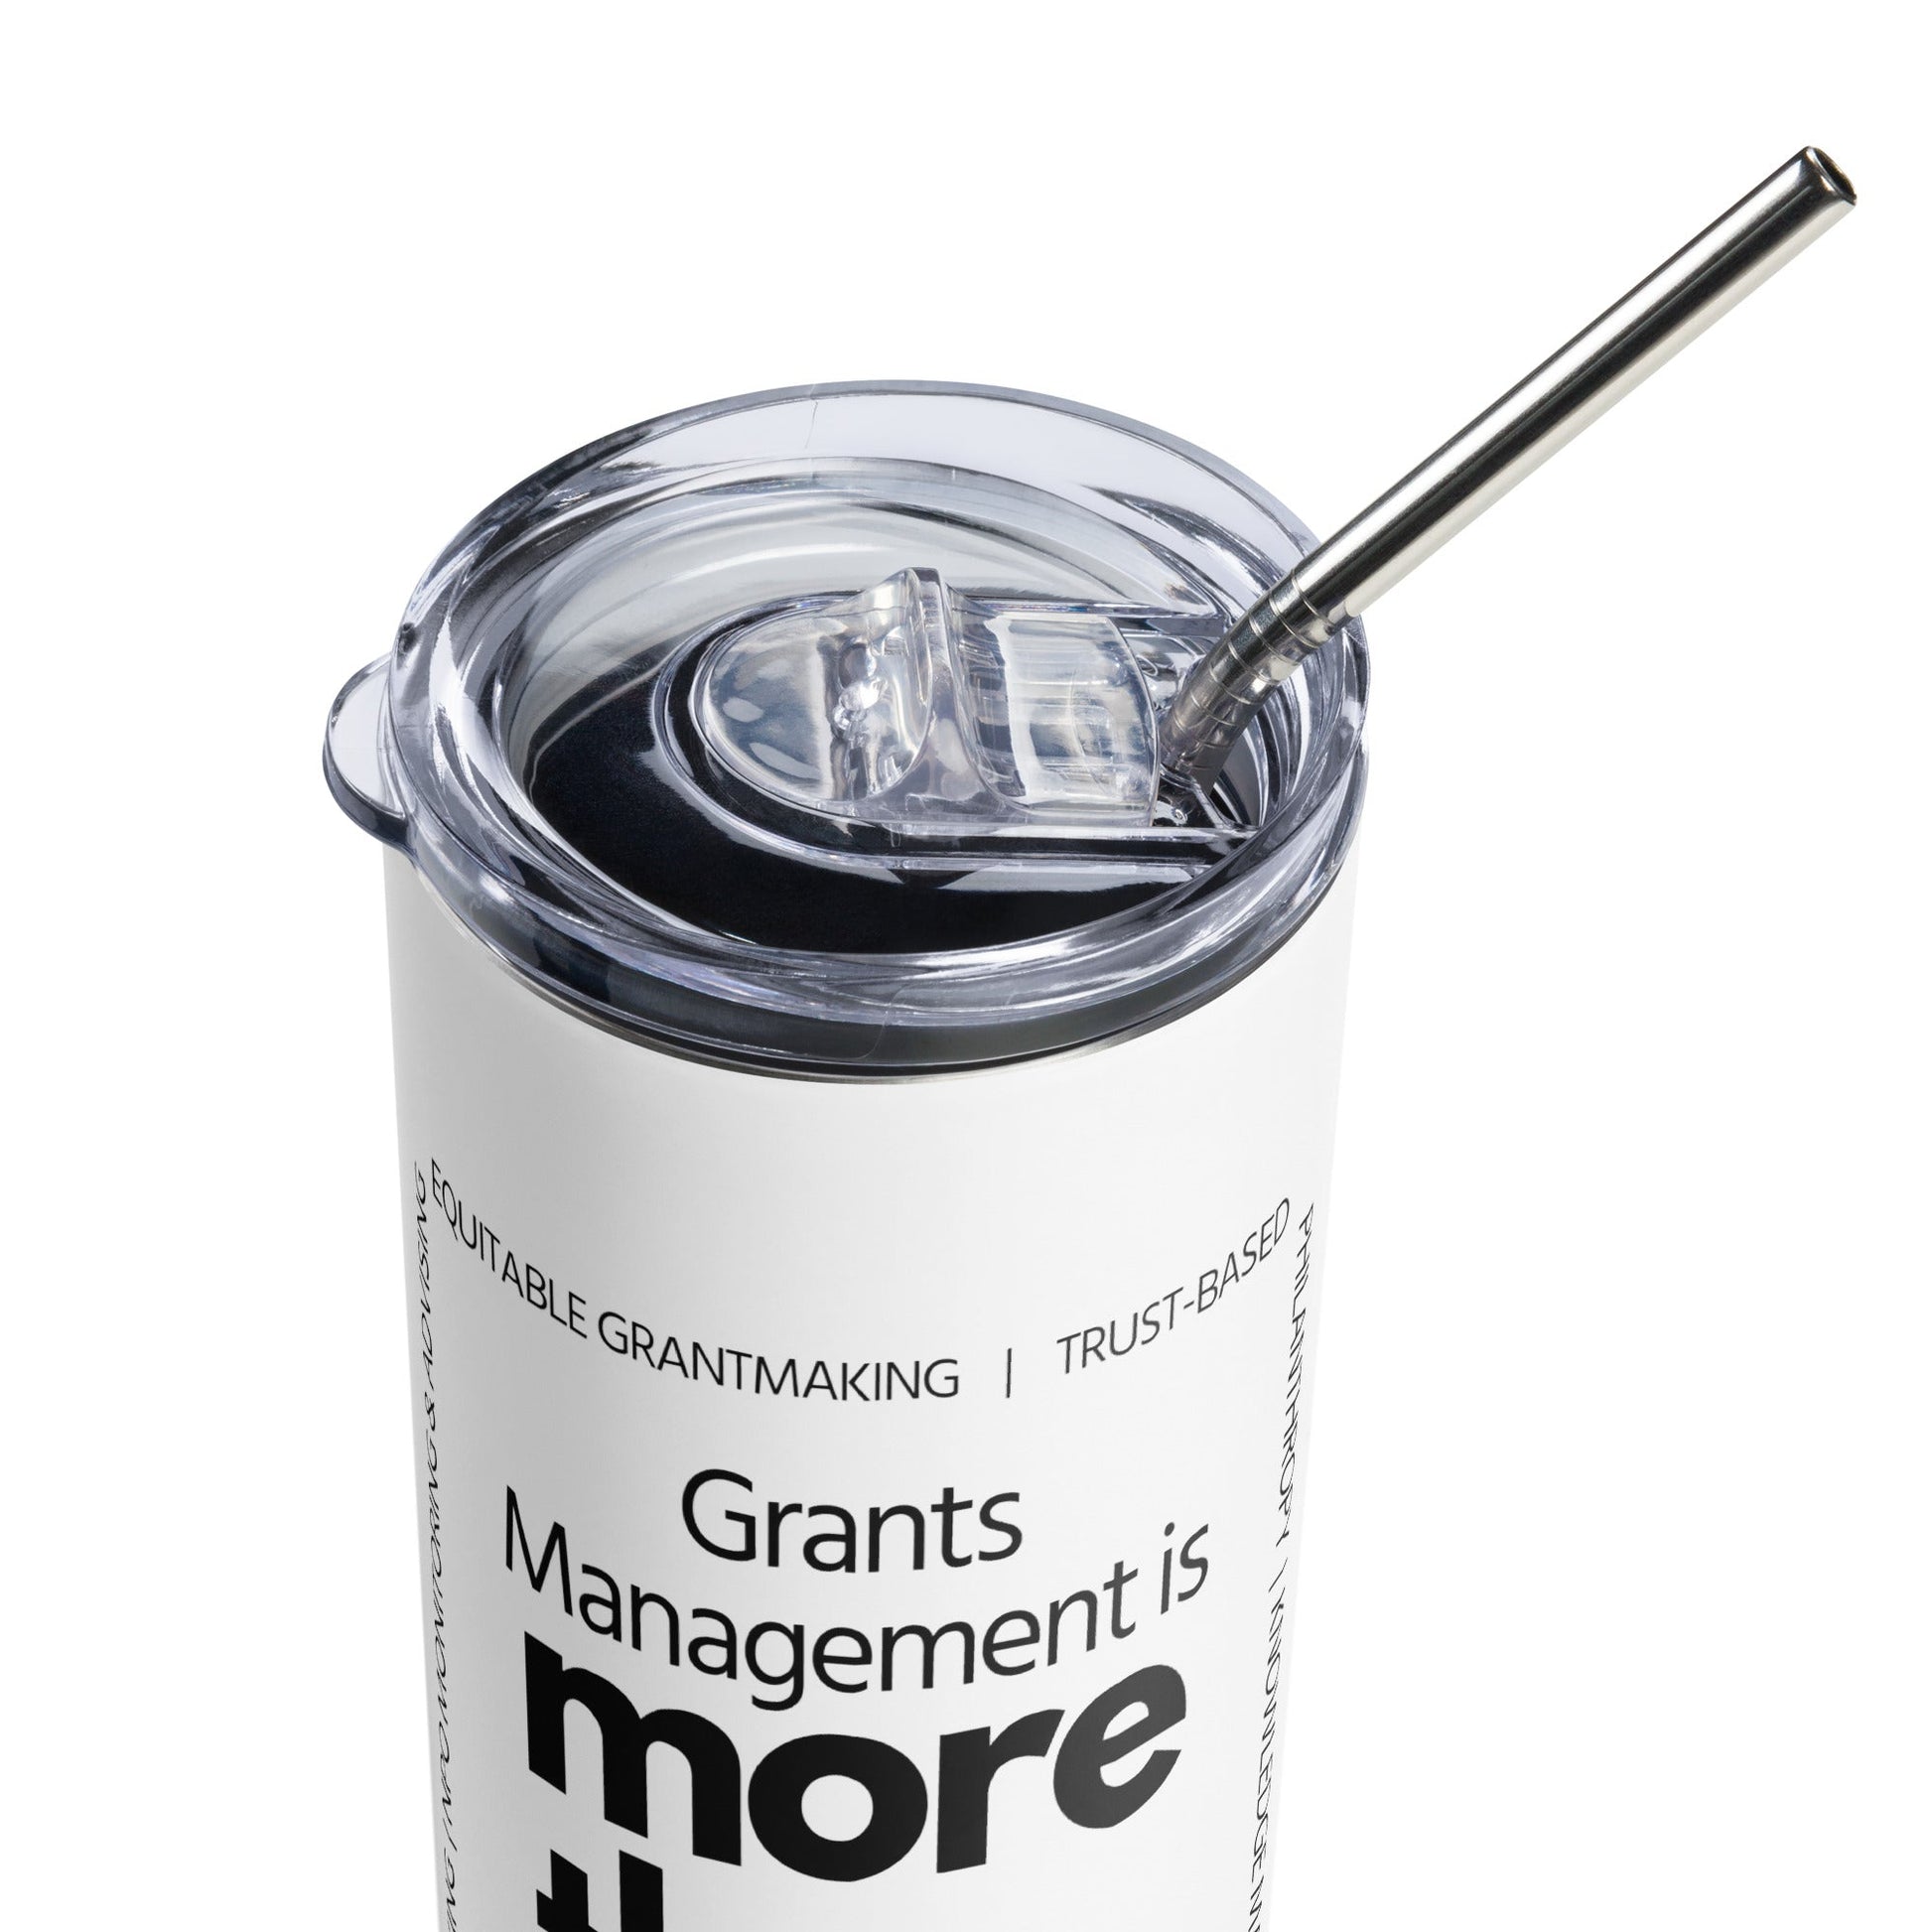 Grants Management is more than IRS & GMS Stainless steel tumbler-recalciGrant